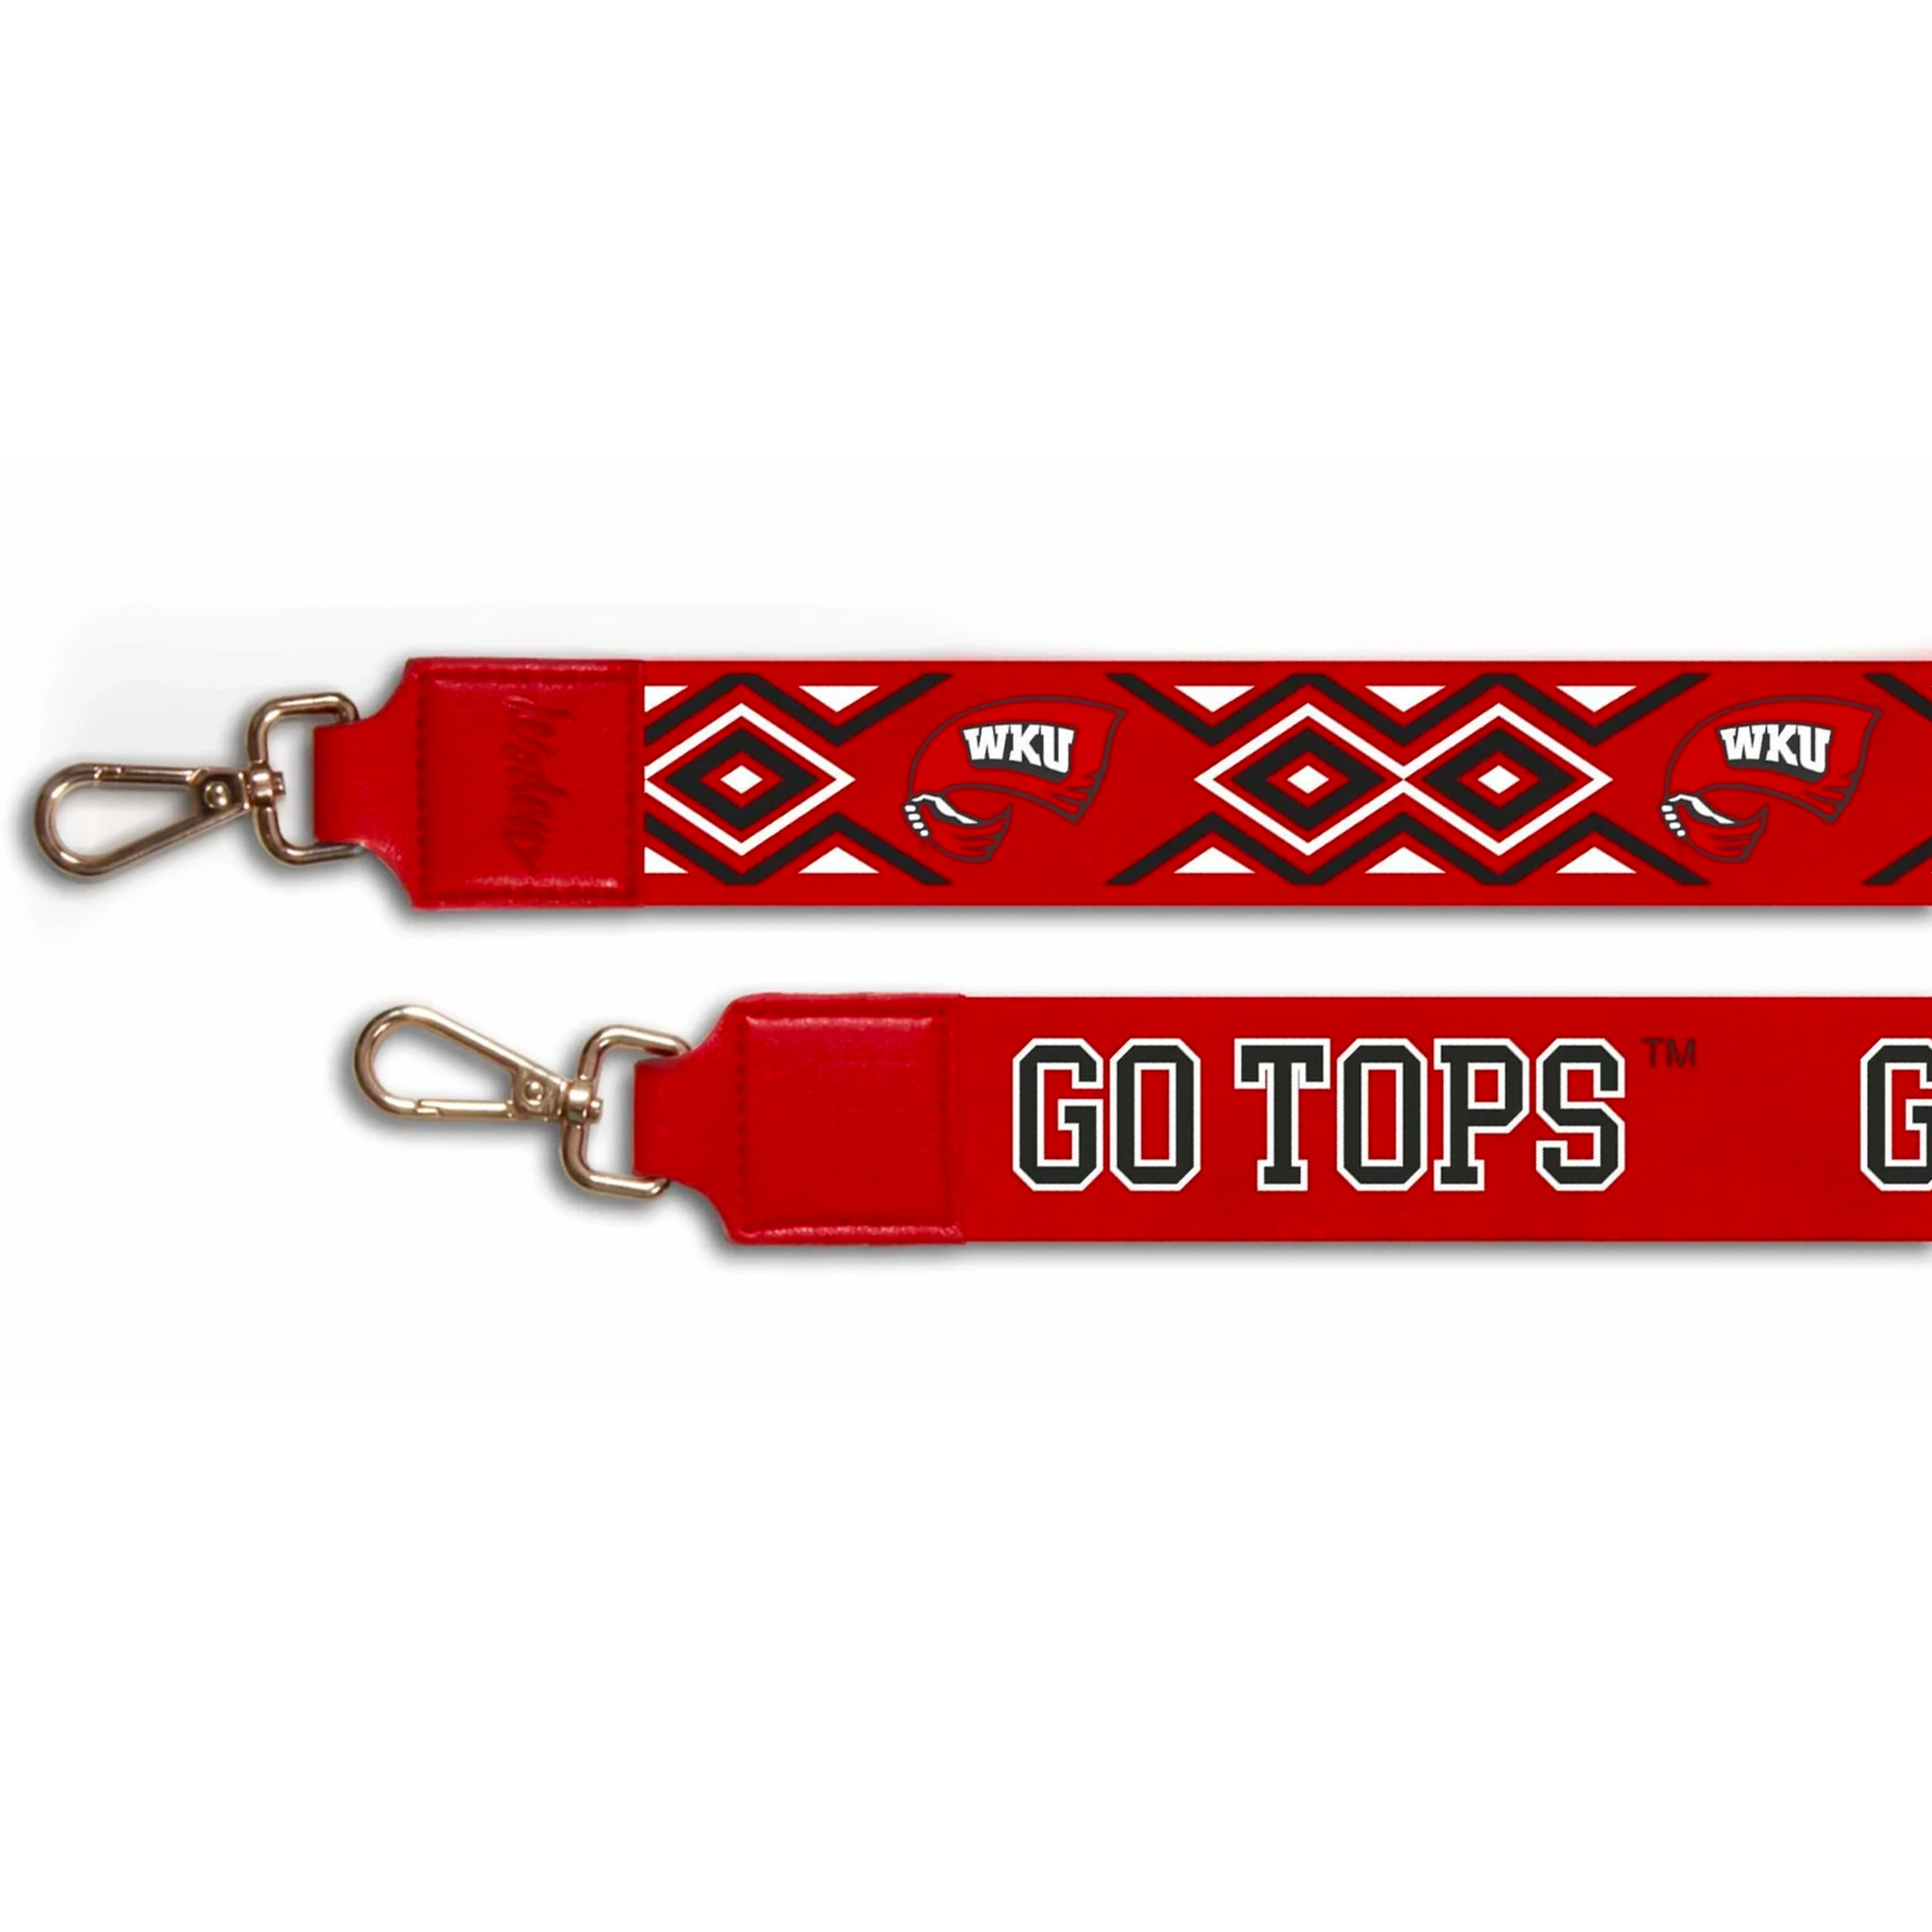 WKU 2" - Officially Licensed - Ikat Design